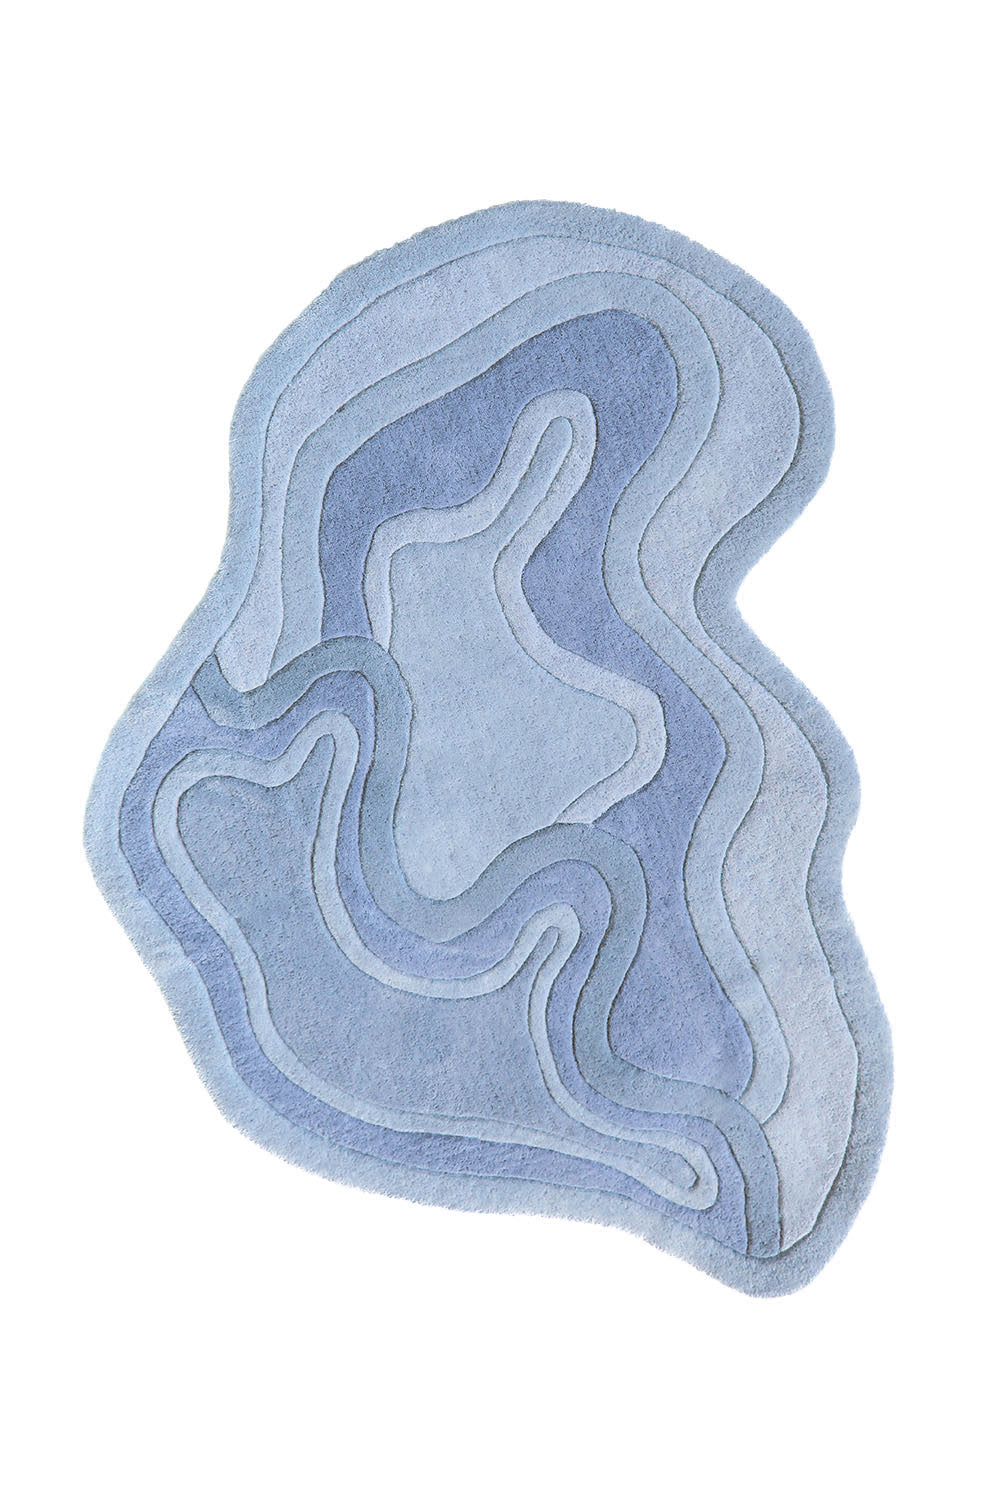 Sky Blue Rolling Tides Shaped Rug - Quirky and Fun for Creative Spaces